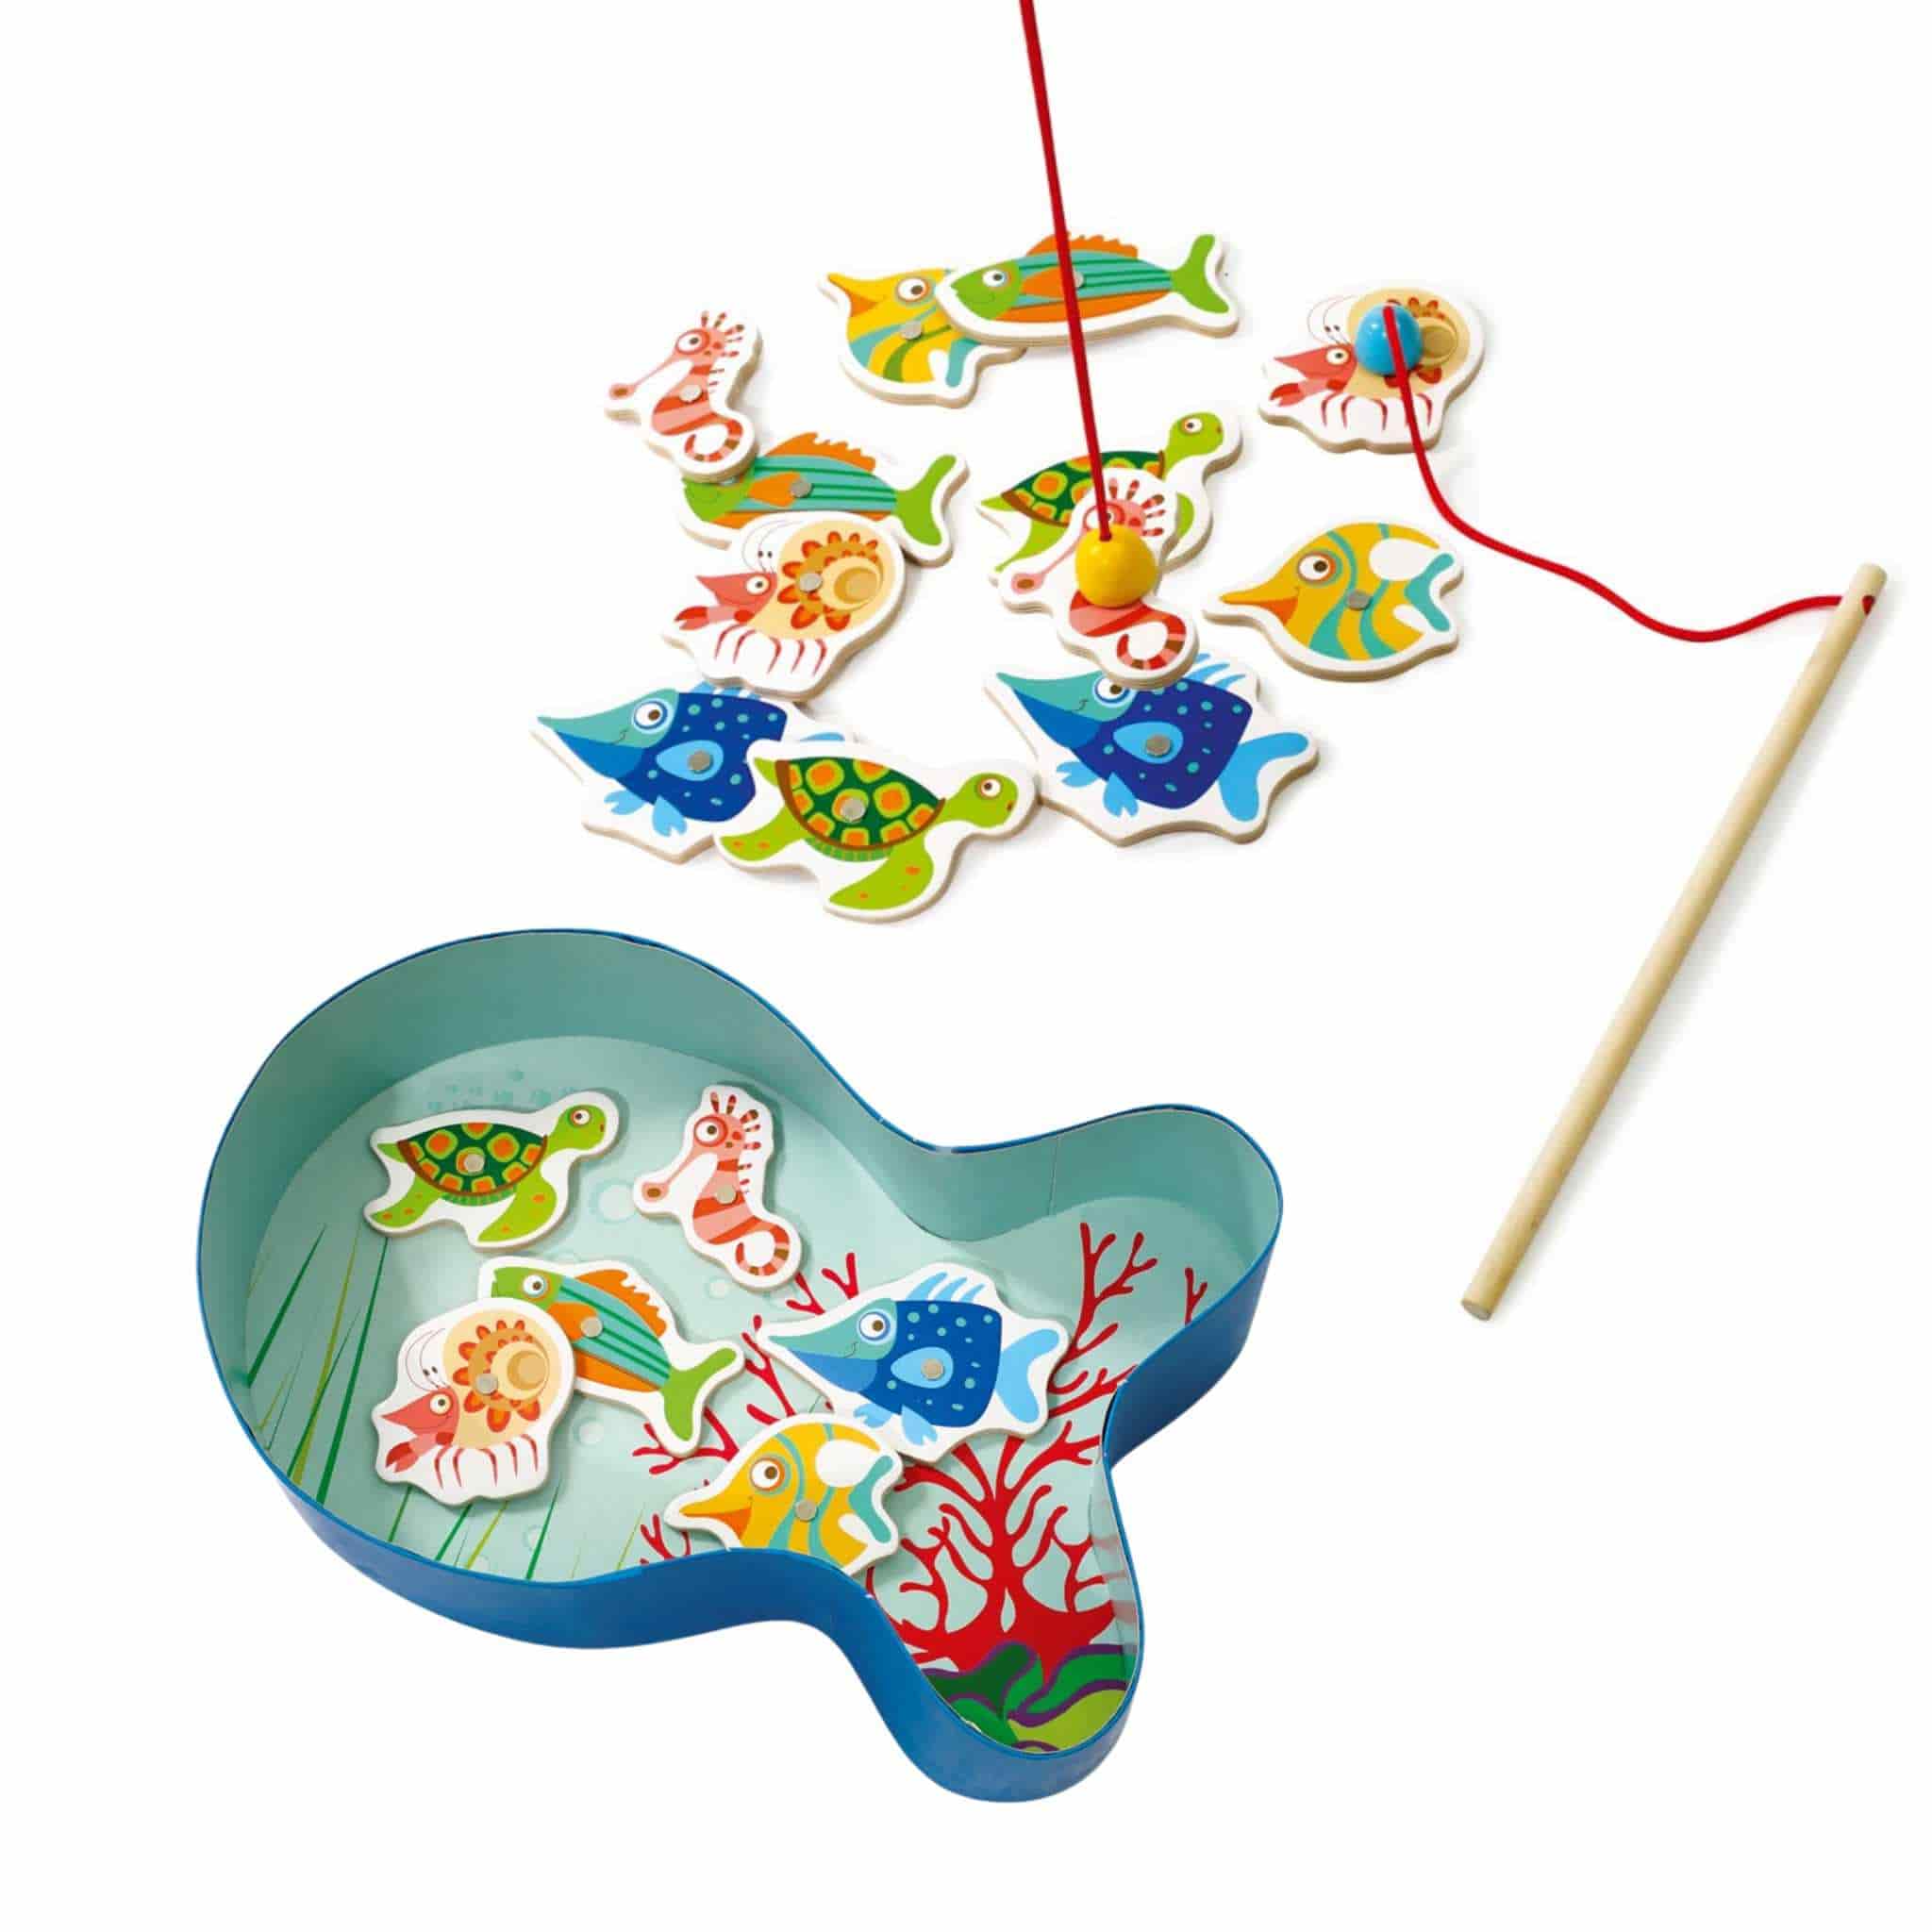 Scratch 3-in-1 Fishing Game